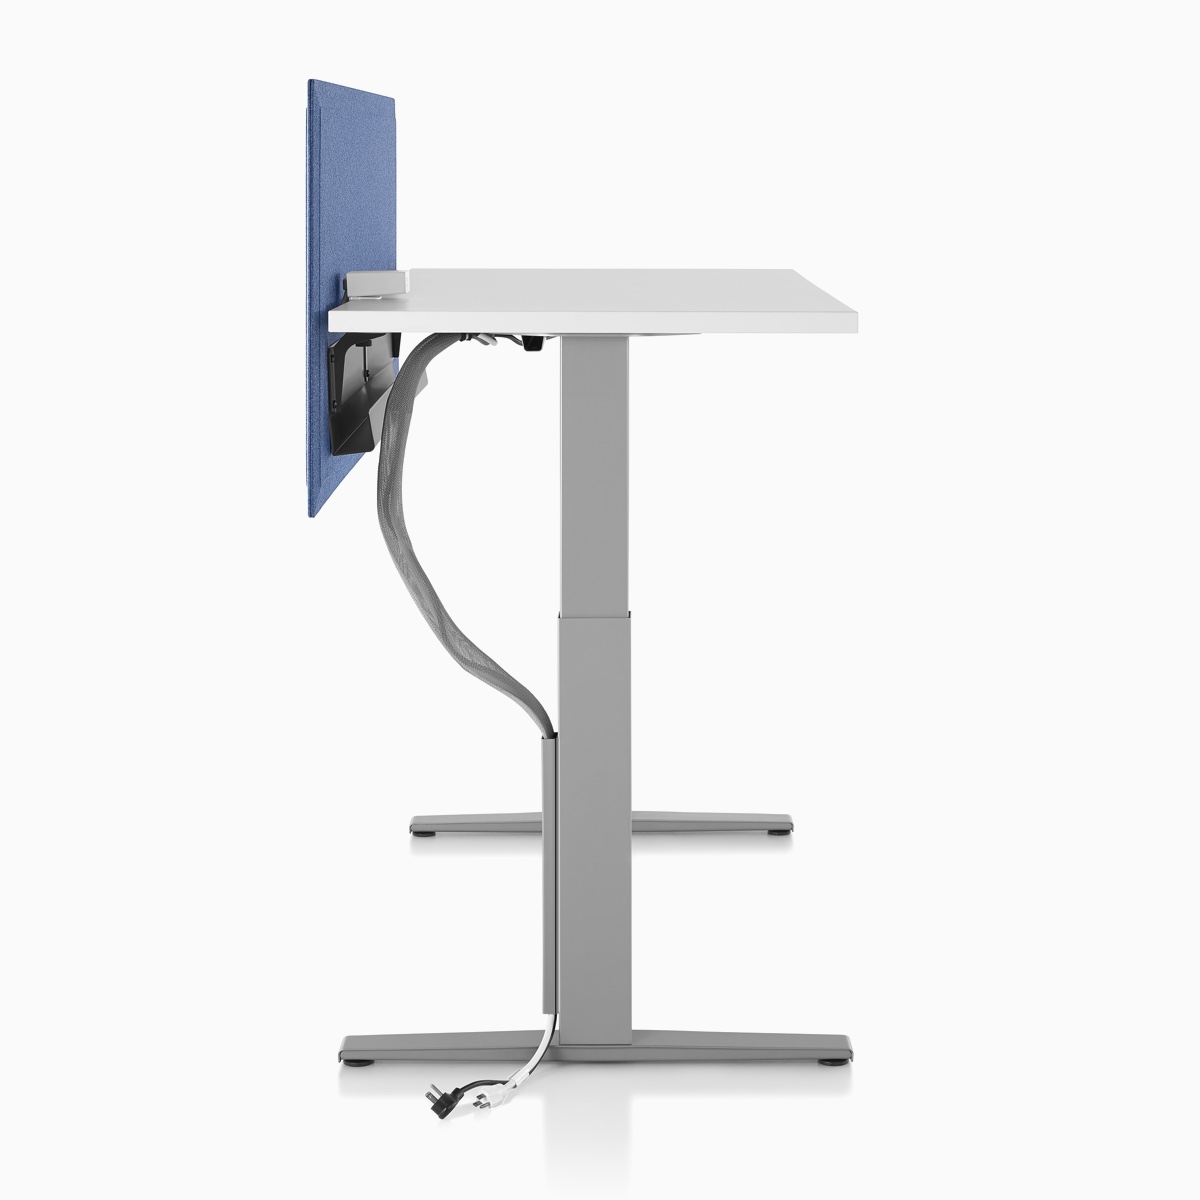 Side profile of Motia Sit-to-Stand Table with a cable management tray attached to the privacy screen and a cable manager attached along the base.